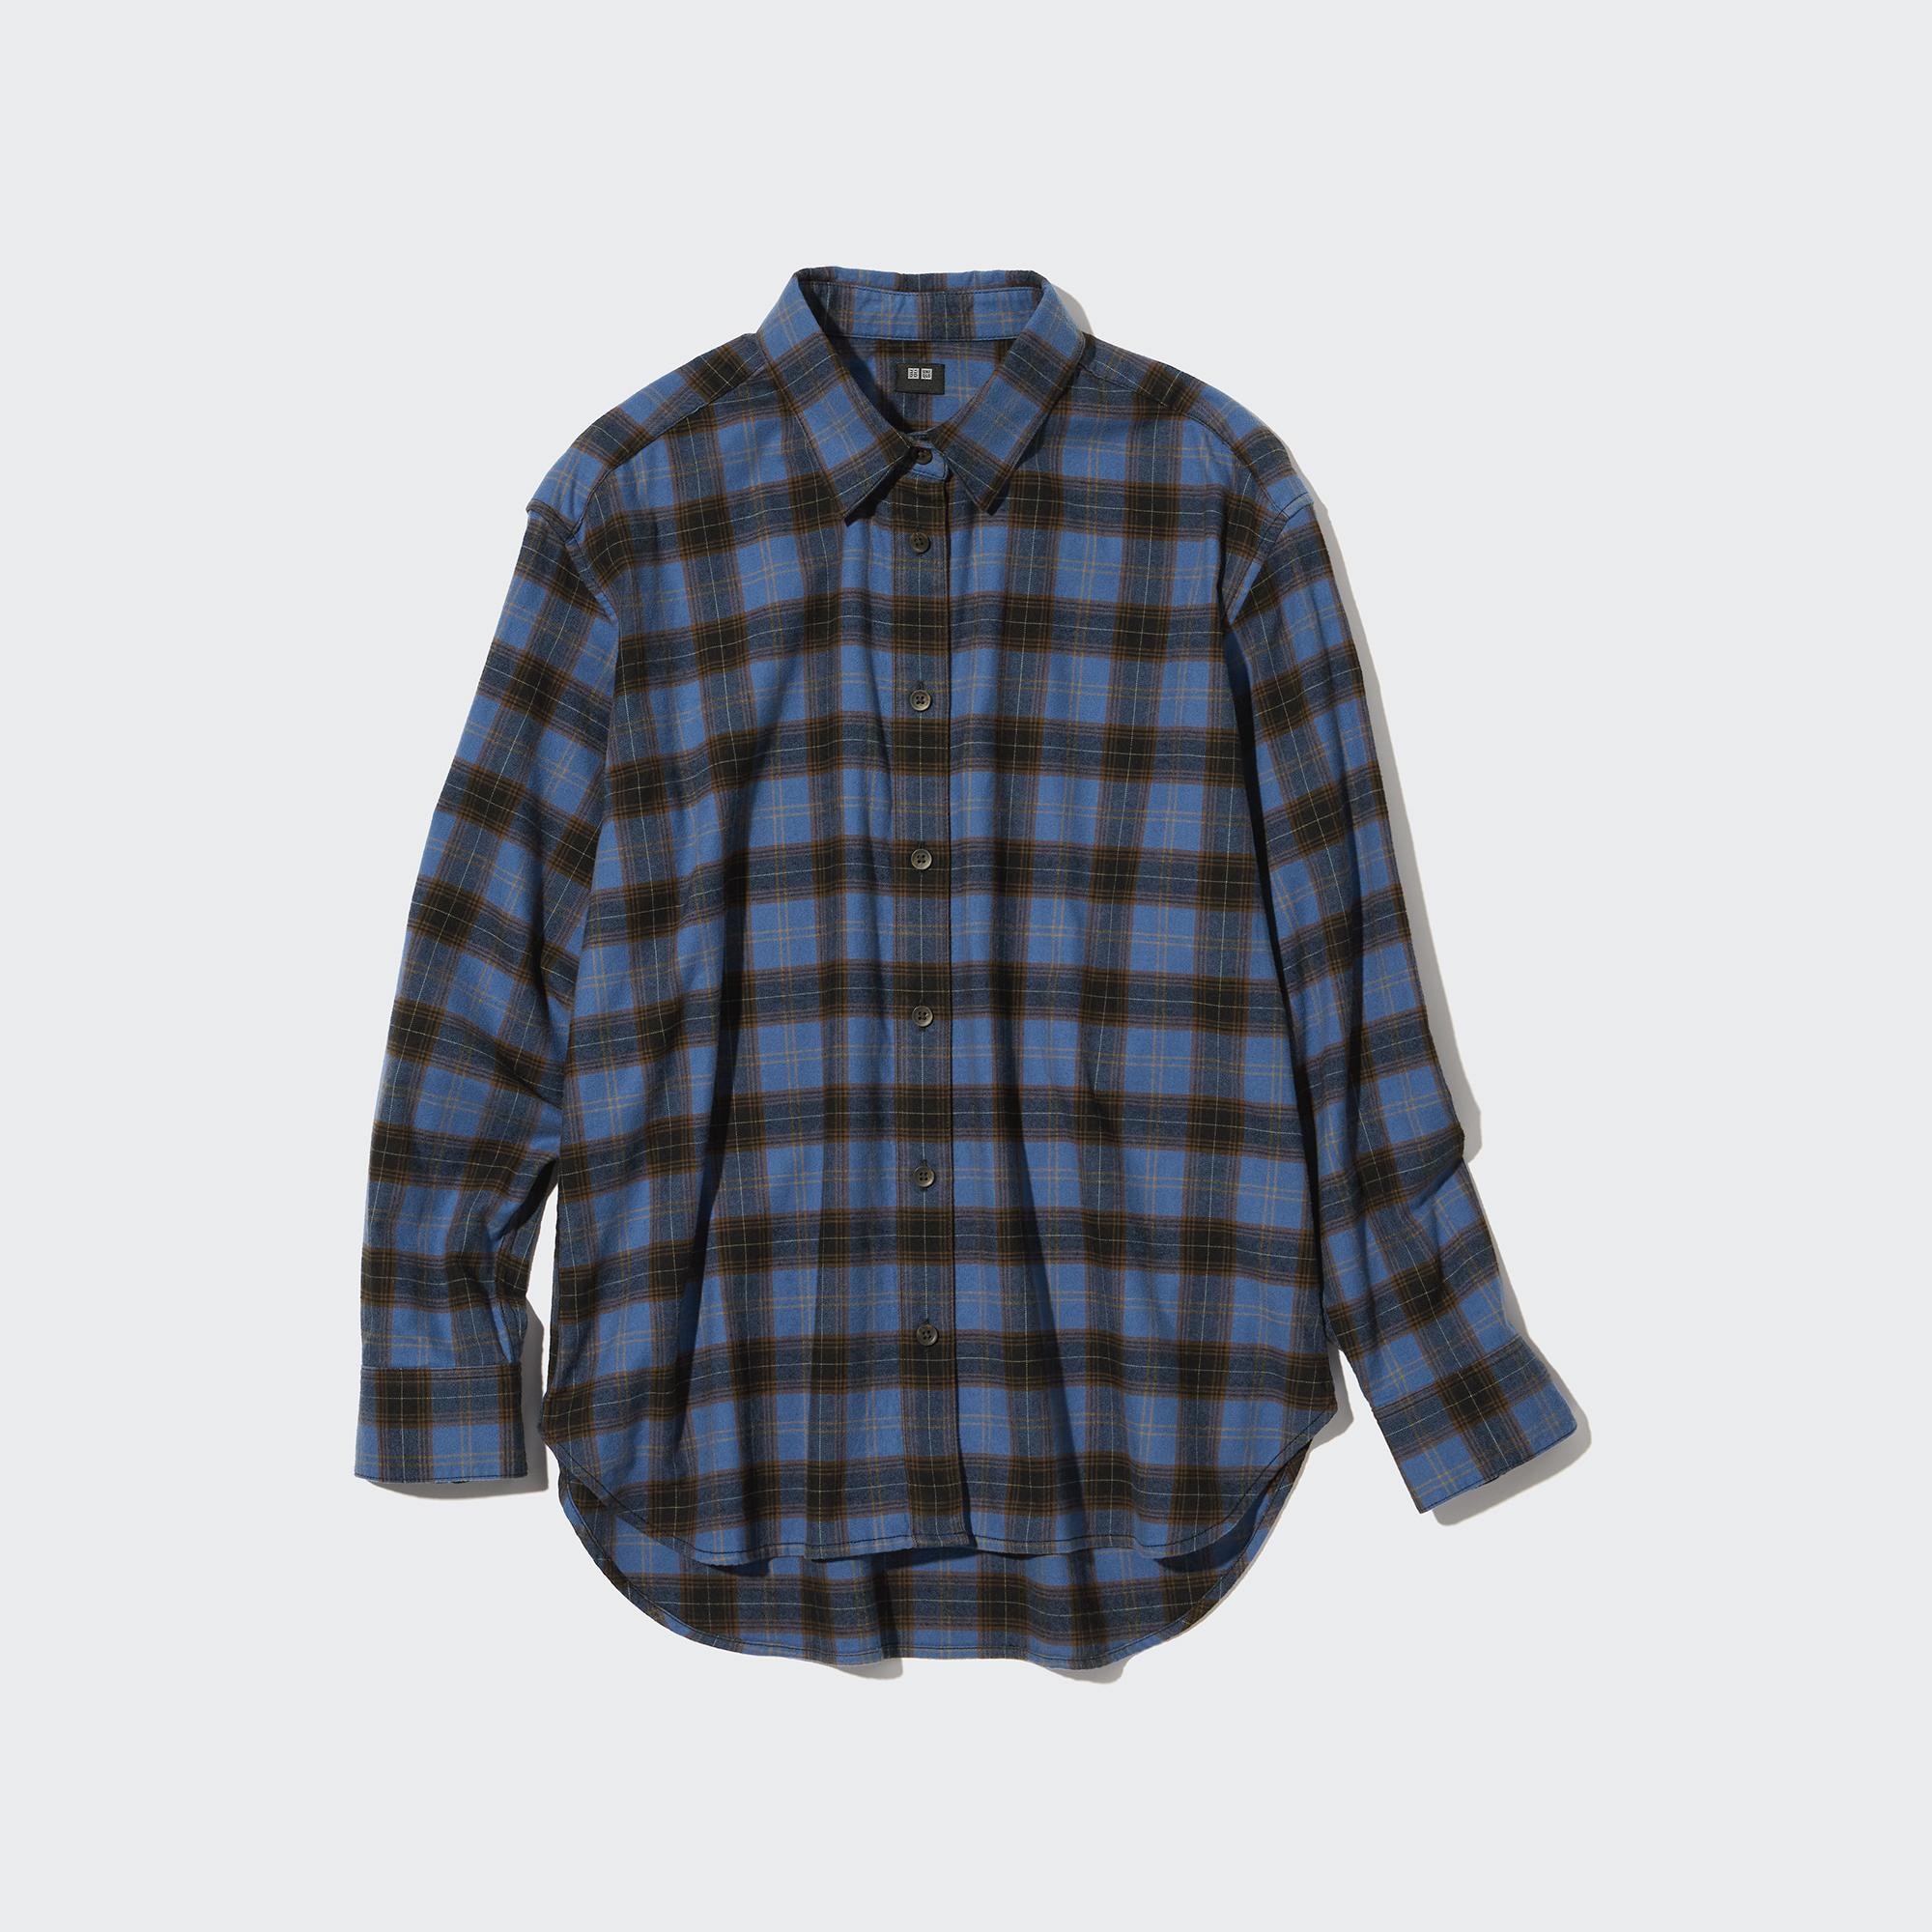 GIRLS FLANNEL CHECKED SHIRT LONG SLEEVE  UNIQLO VN